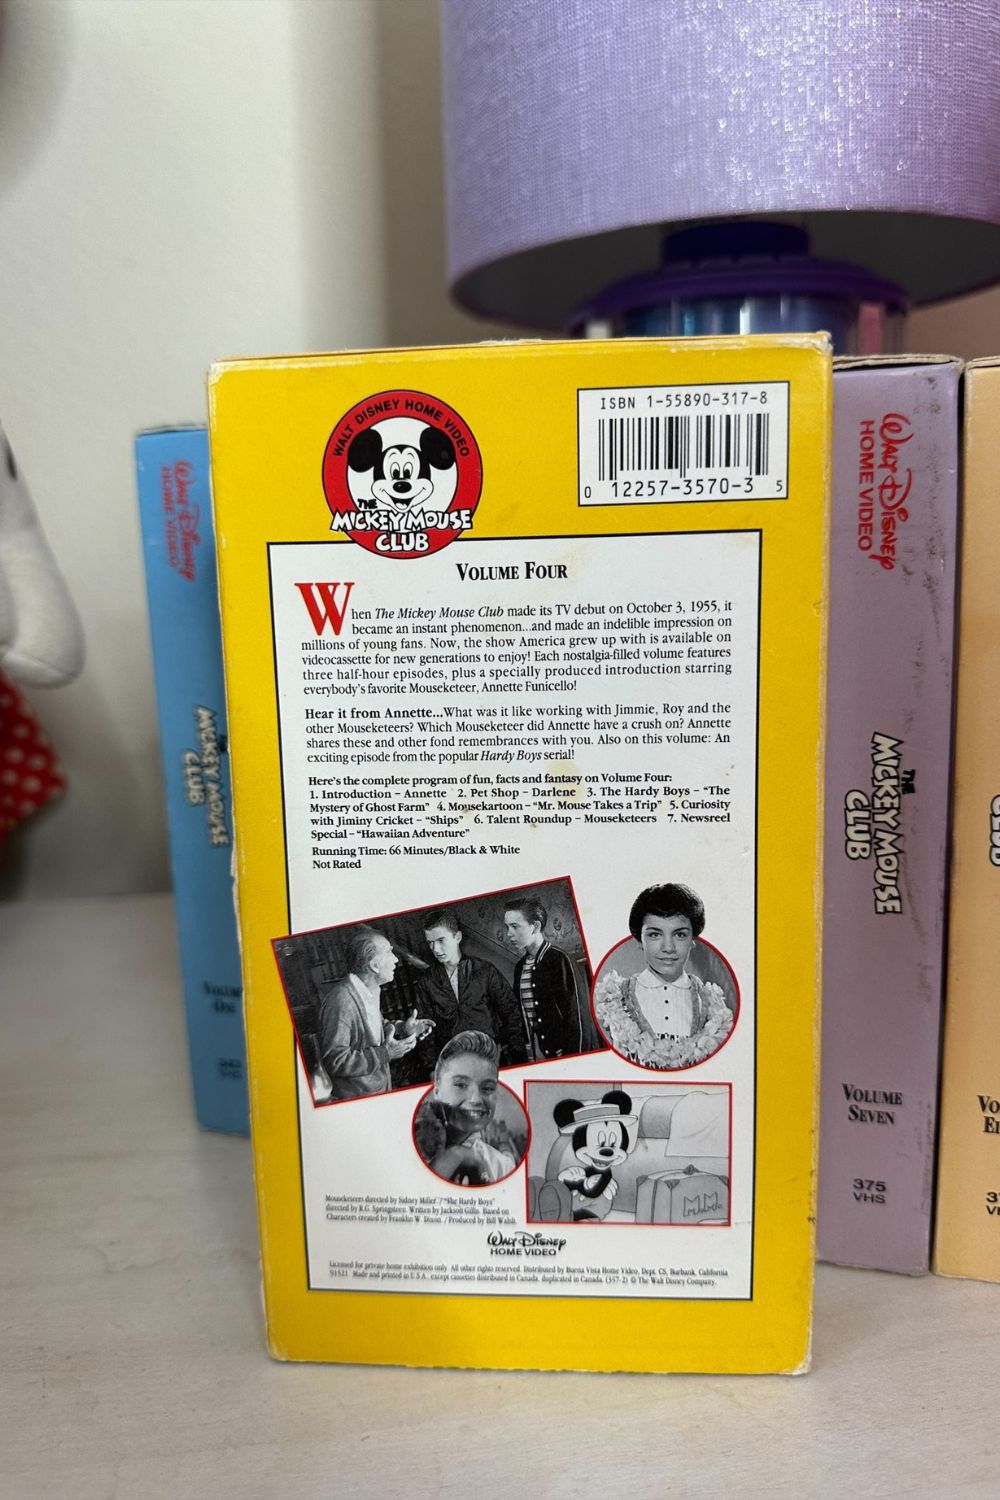 WALT DISNEY HOME VIDEO " THE MICKEY MOUSE CLUB" VOLUME FOUR*